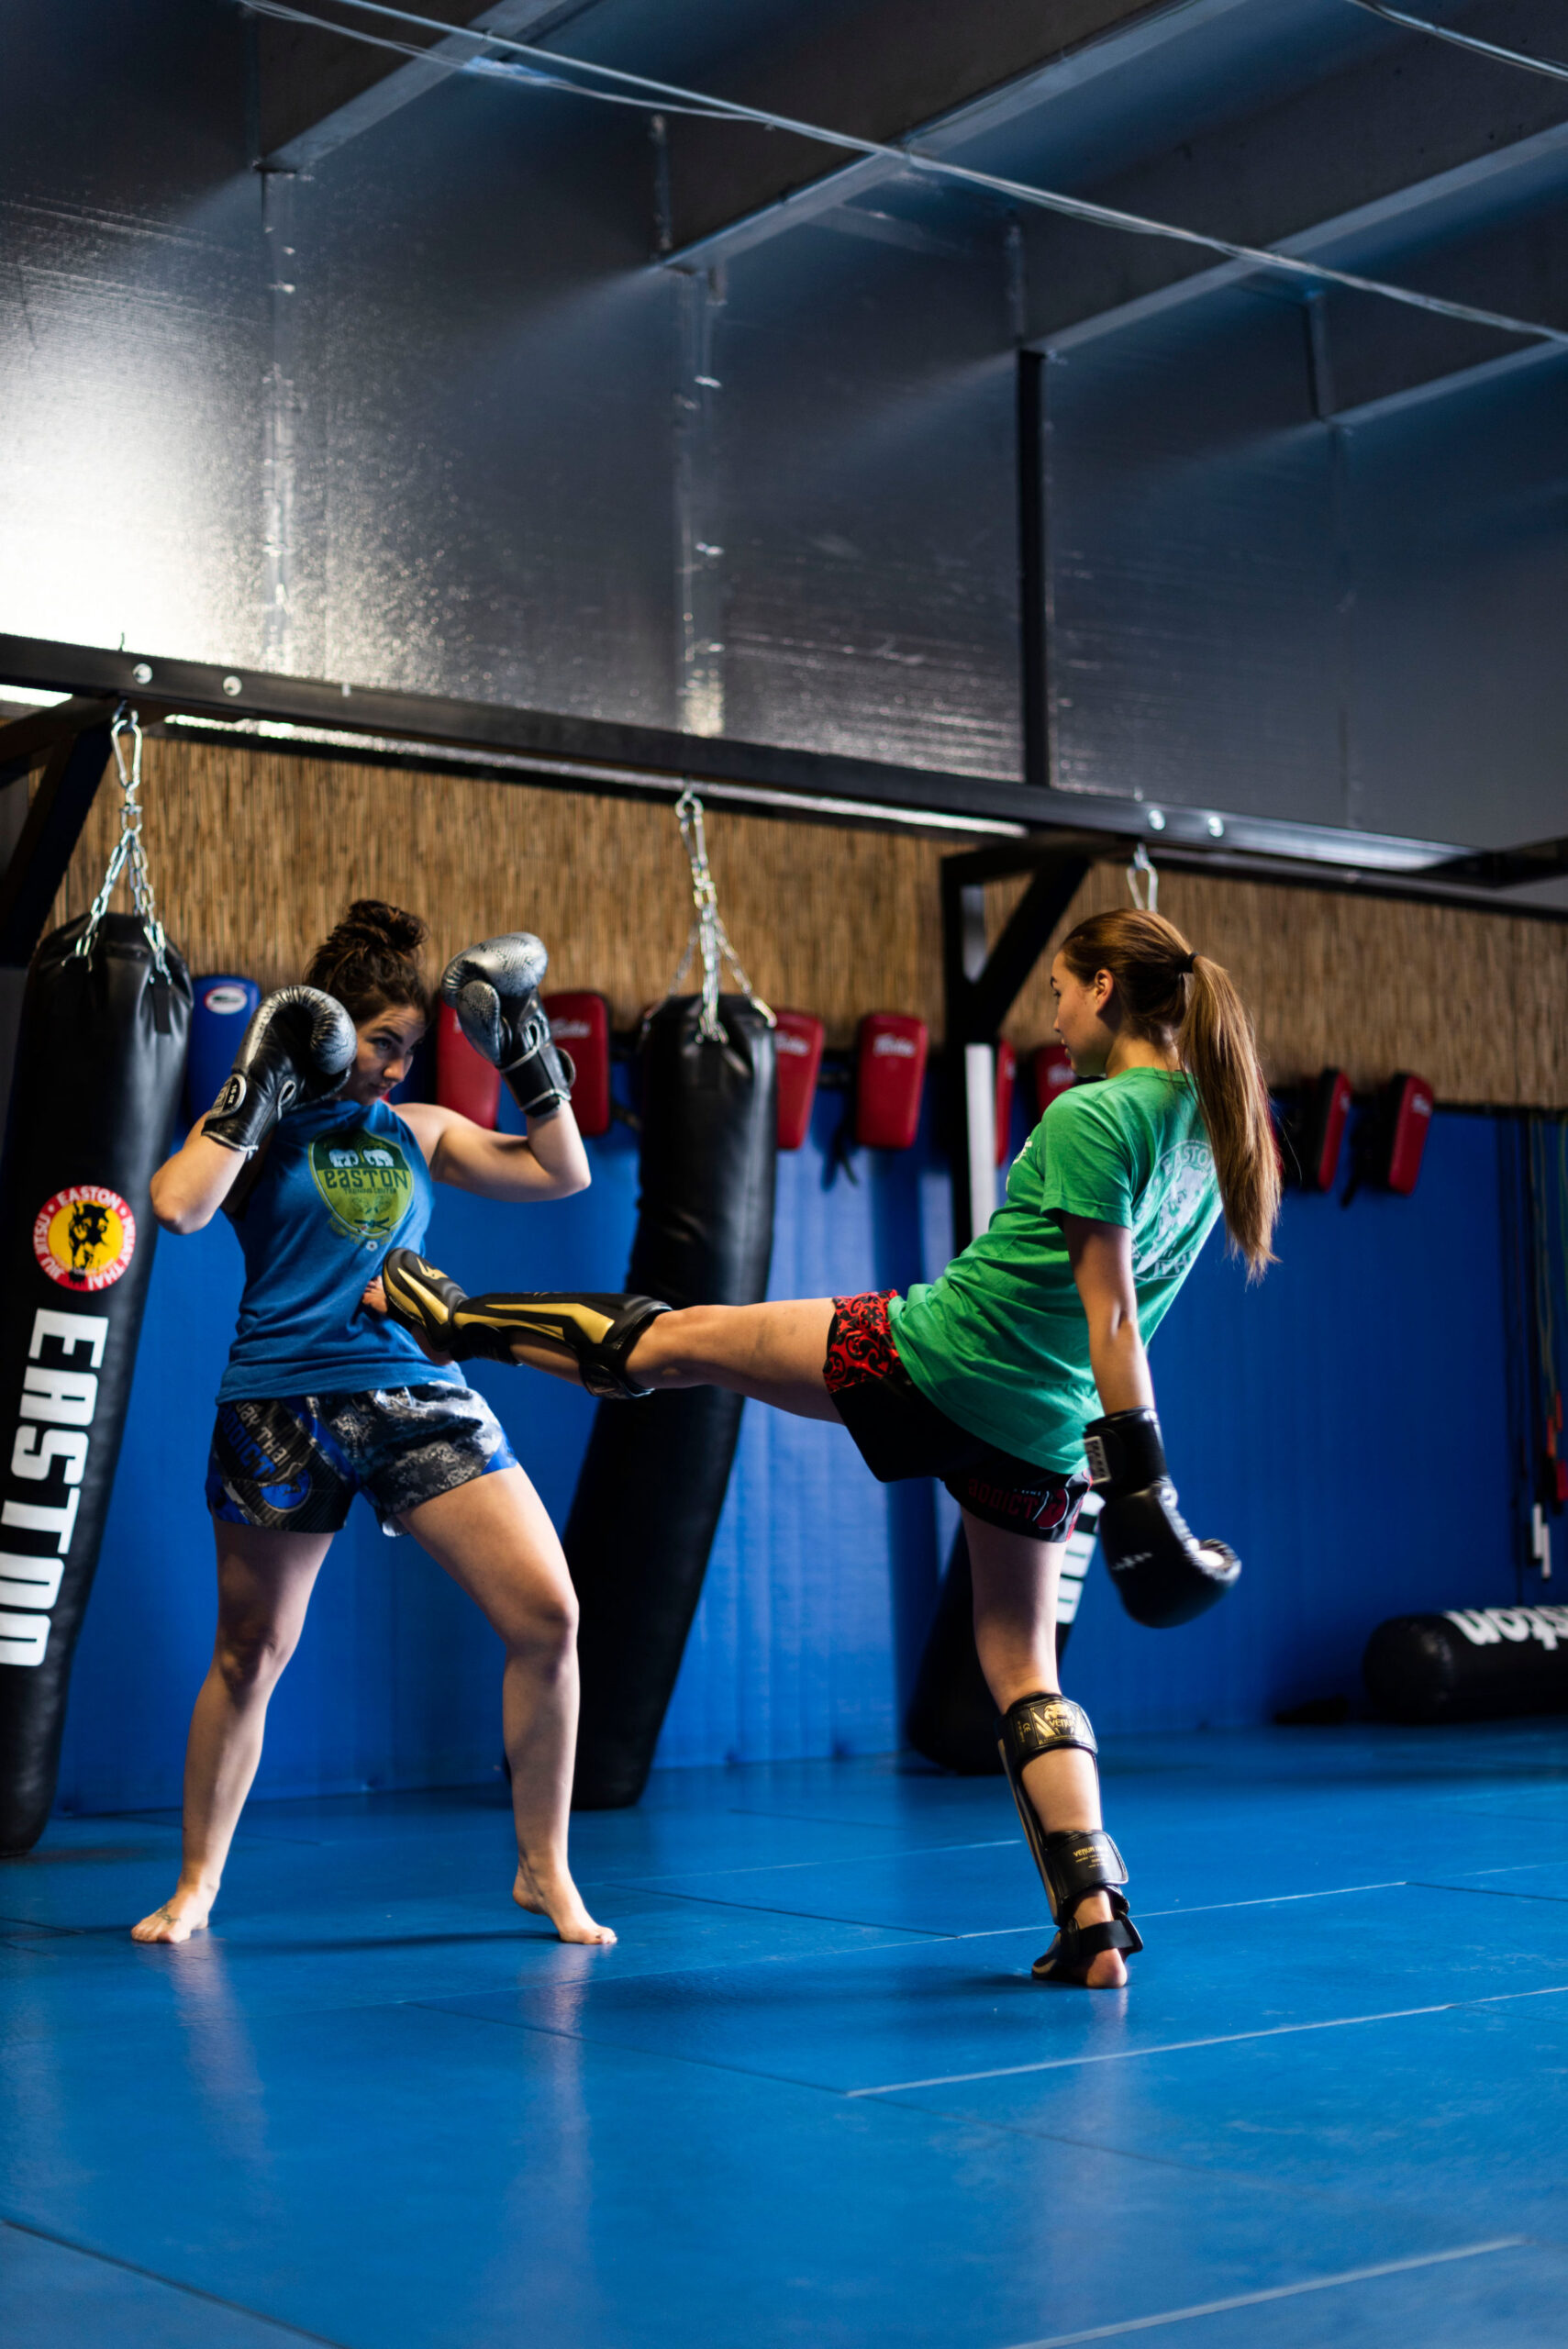 two women wearing boxing gloves face each other, one aims a teep kick at the other's stomach